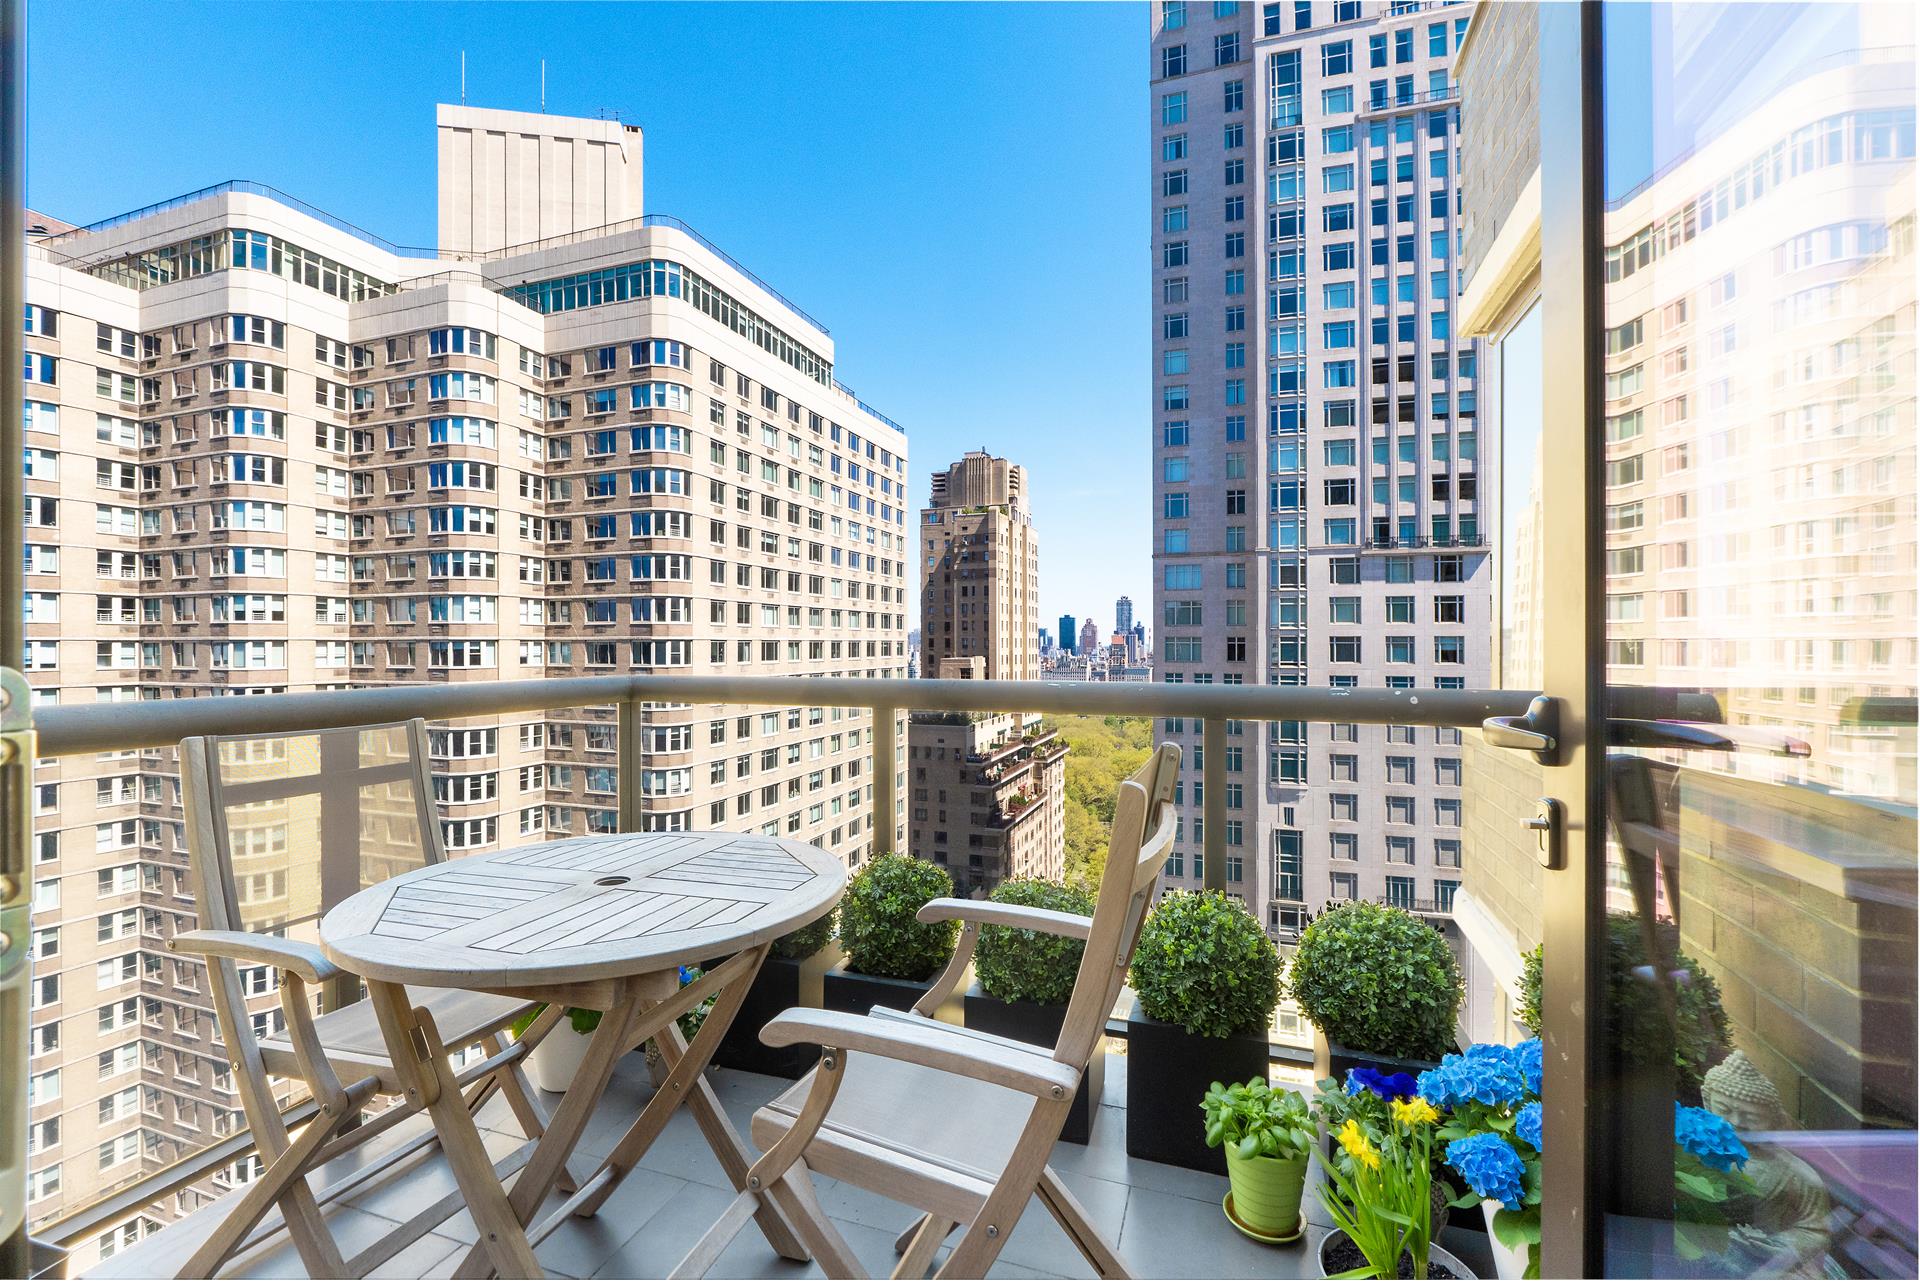 62 West 62nd Street 26B, Lincoln Sq, Upper West Side, NYC - 2 Bedrooms  
2 Bathrooms  
6 Rooms - 